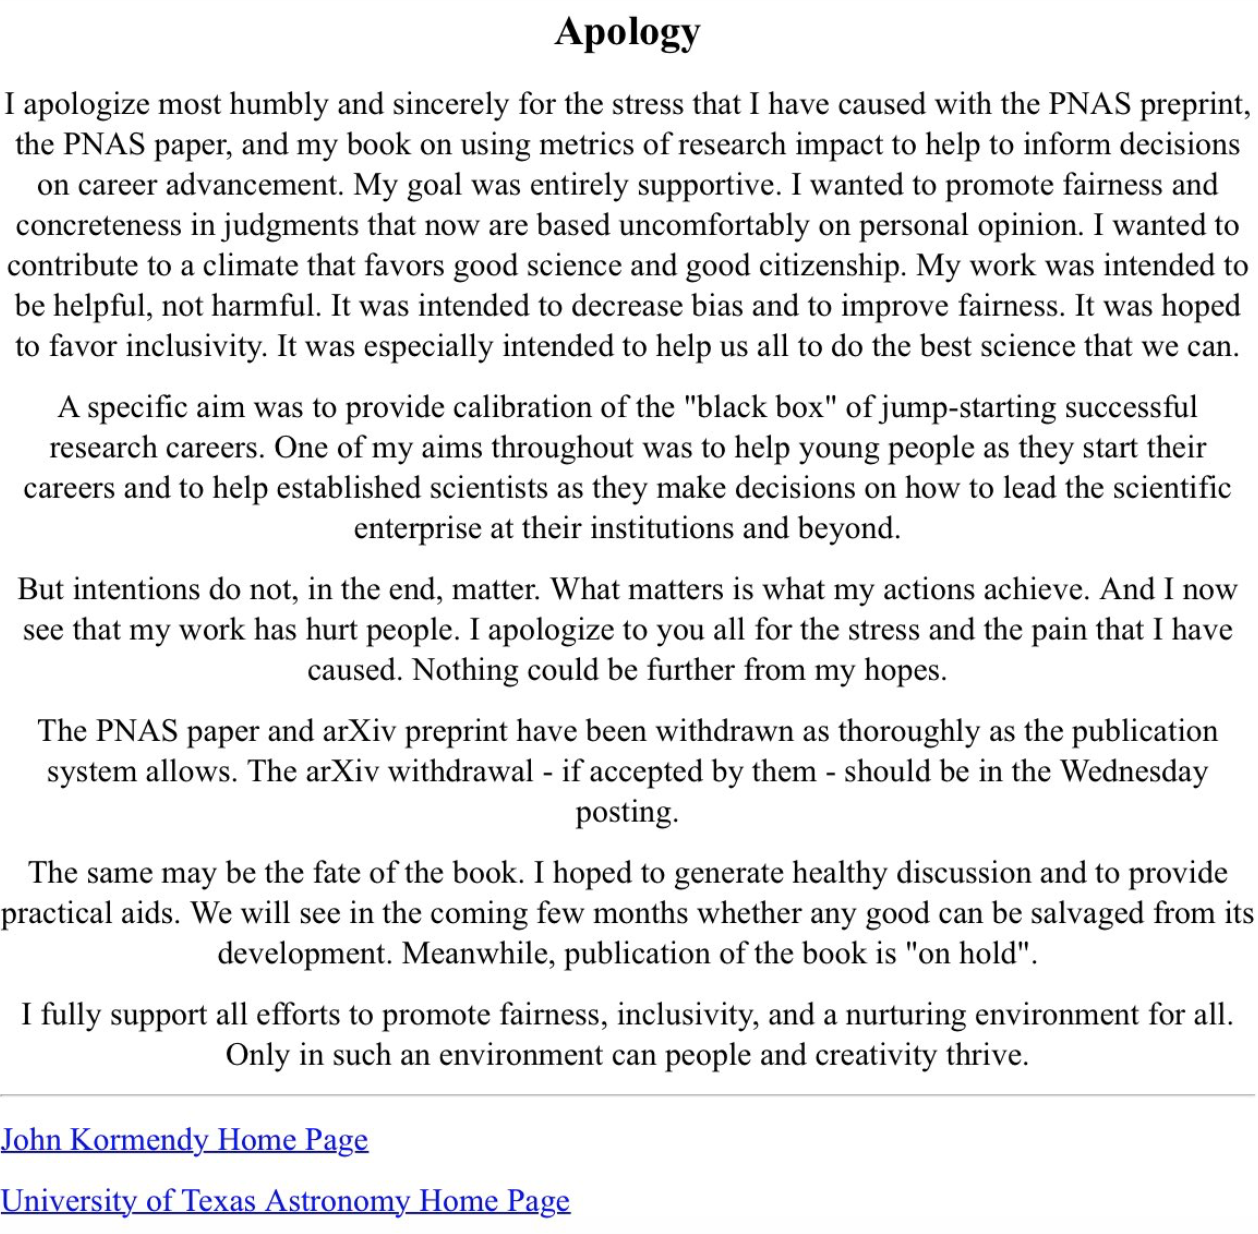 I apologize most humbly and sincerely for the stress that I have caused with the PNAS preprint, the PNAS paper, and my book on using metrics of research impact to help to inform decisions on career advancement. My goal was entirely supportive. I wanted to promote fairness and concreteness in judgments that now are based uncomfortably on personal opinion. I wanted to contribute to a climate that favors good science and good citizenship. My work was intended to be helpful, not harmful. It was intended to decrease bias and to improve fairness. It was hoped to favor inclusivity. It was especially intended to help us all to do the best science that we can. A specific aim was to provide calibration of the “black box” of jump-starting successful research careers. One of my aims throughout was to help young people as they start their careers and to help established scientists as they make decisions on how to lead the scientific enterprise at their institutions and beyond. But intentions do not, in the end, matter. What matters is what my actions achieve. And I now see that my work has hurt people. I apologize to you all for the stress and the pain that I have caused. Nothing could be further from my hopes. The PNAS paper and arXiv preprint have been withdrawn as thoroughly as the publication system allows. The arXiv withdrawal – if accepted by them – should be in the Wednesday posting. The same may be the fate of the book. I hoped to generate healthy discussion and to provide practical aids. We will see in the coming few months whether any good can be salvaged from its development. Meanwhile, publication of the book is “on hold.” I fully support all efforts to promote fairness, inclusivity, and a nurturing environment for all. Only in such an environment can people and creativity thrive.